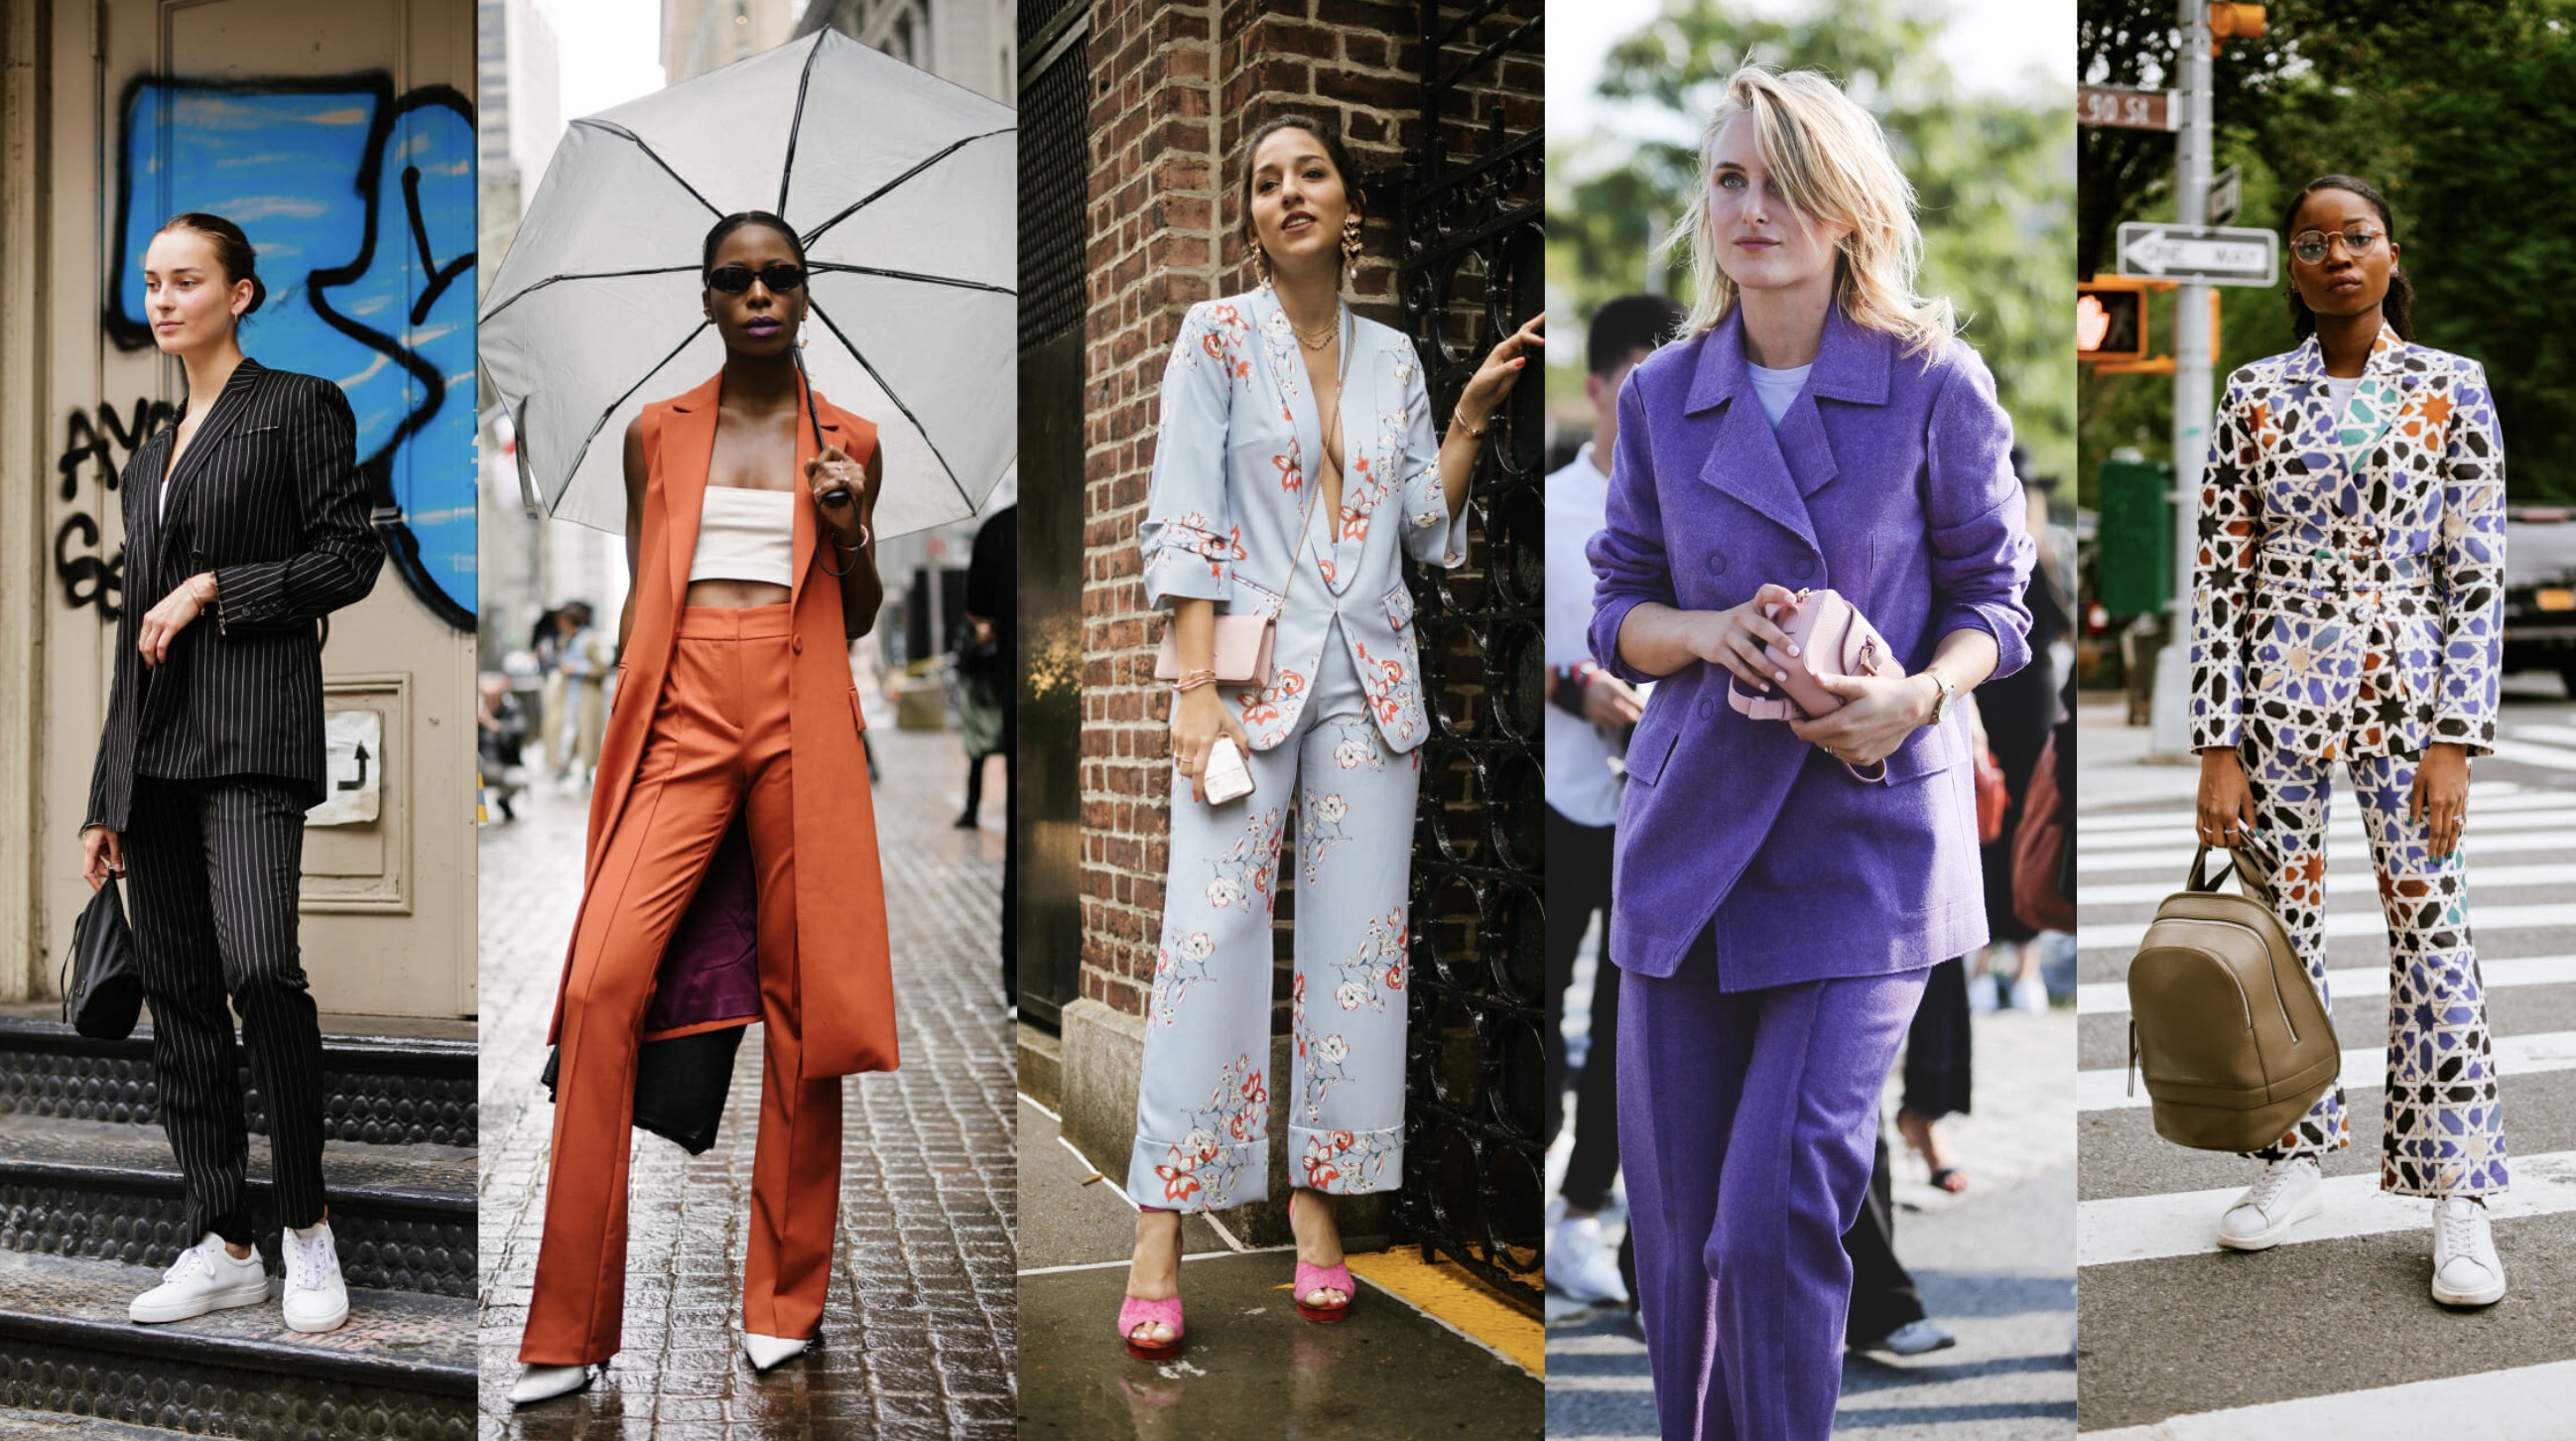 The Grey Edit-NYFW Street Style Looks by Trend-Two Piece Pant Suits